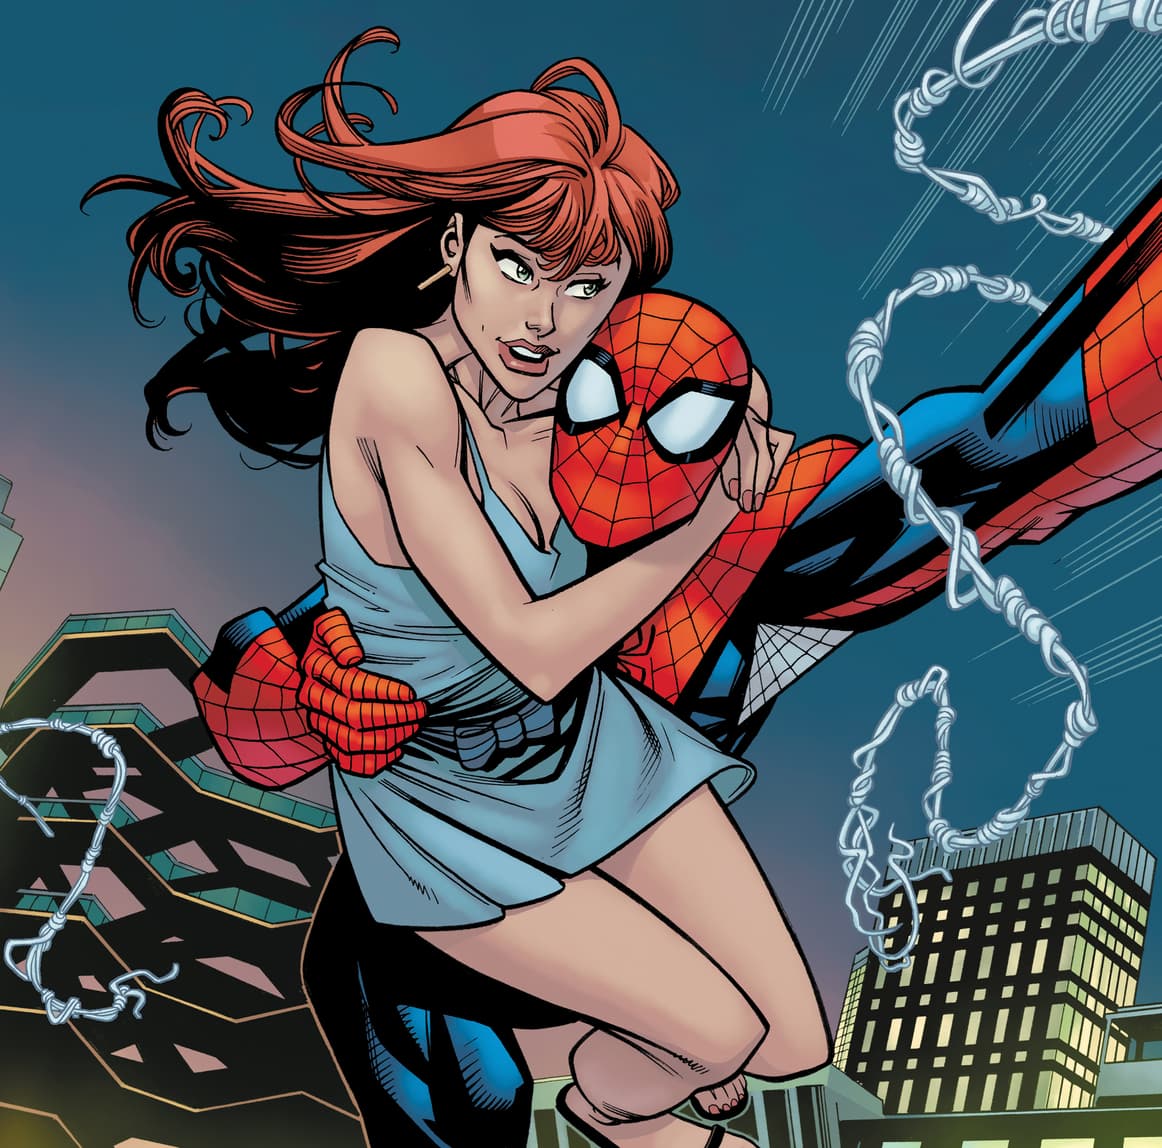 AMAZING SPIDER-MAN #24 Interior art by Ran Ottley with inks by Mark Morales and Cliff Rathburn, with colors by Nathan Fairbairn